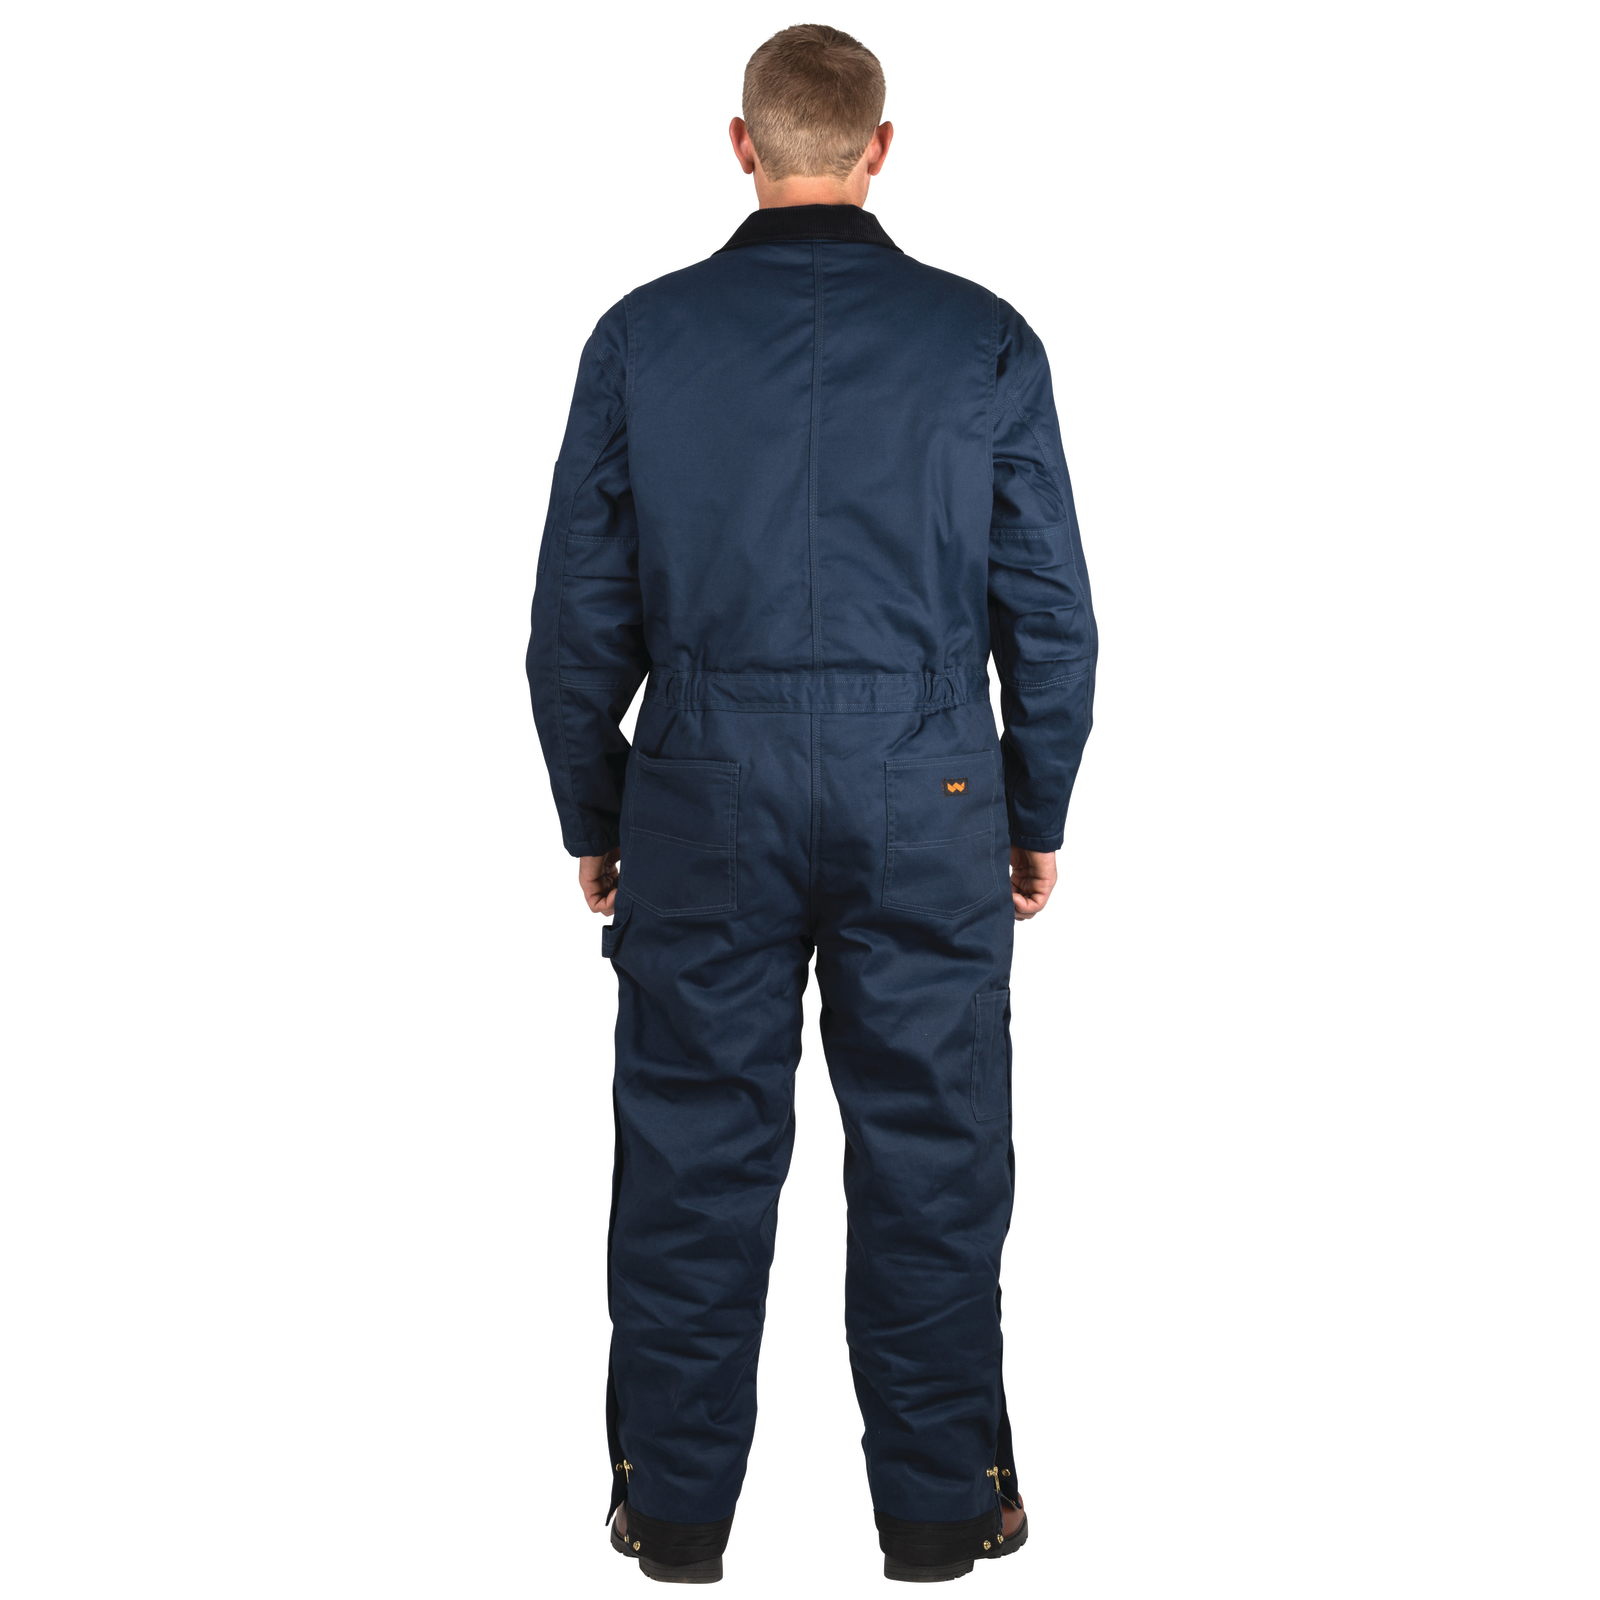 Garland Twill Insulated Work Coverall | Walls®